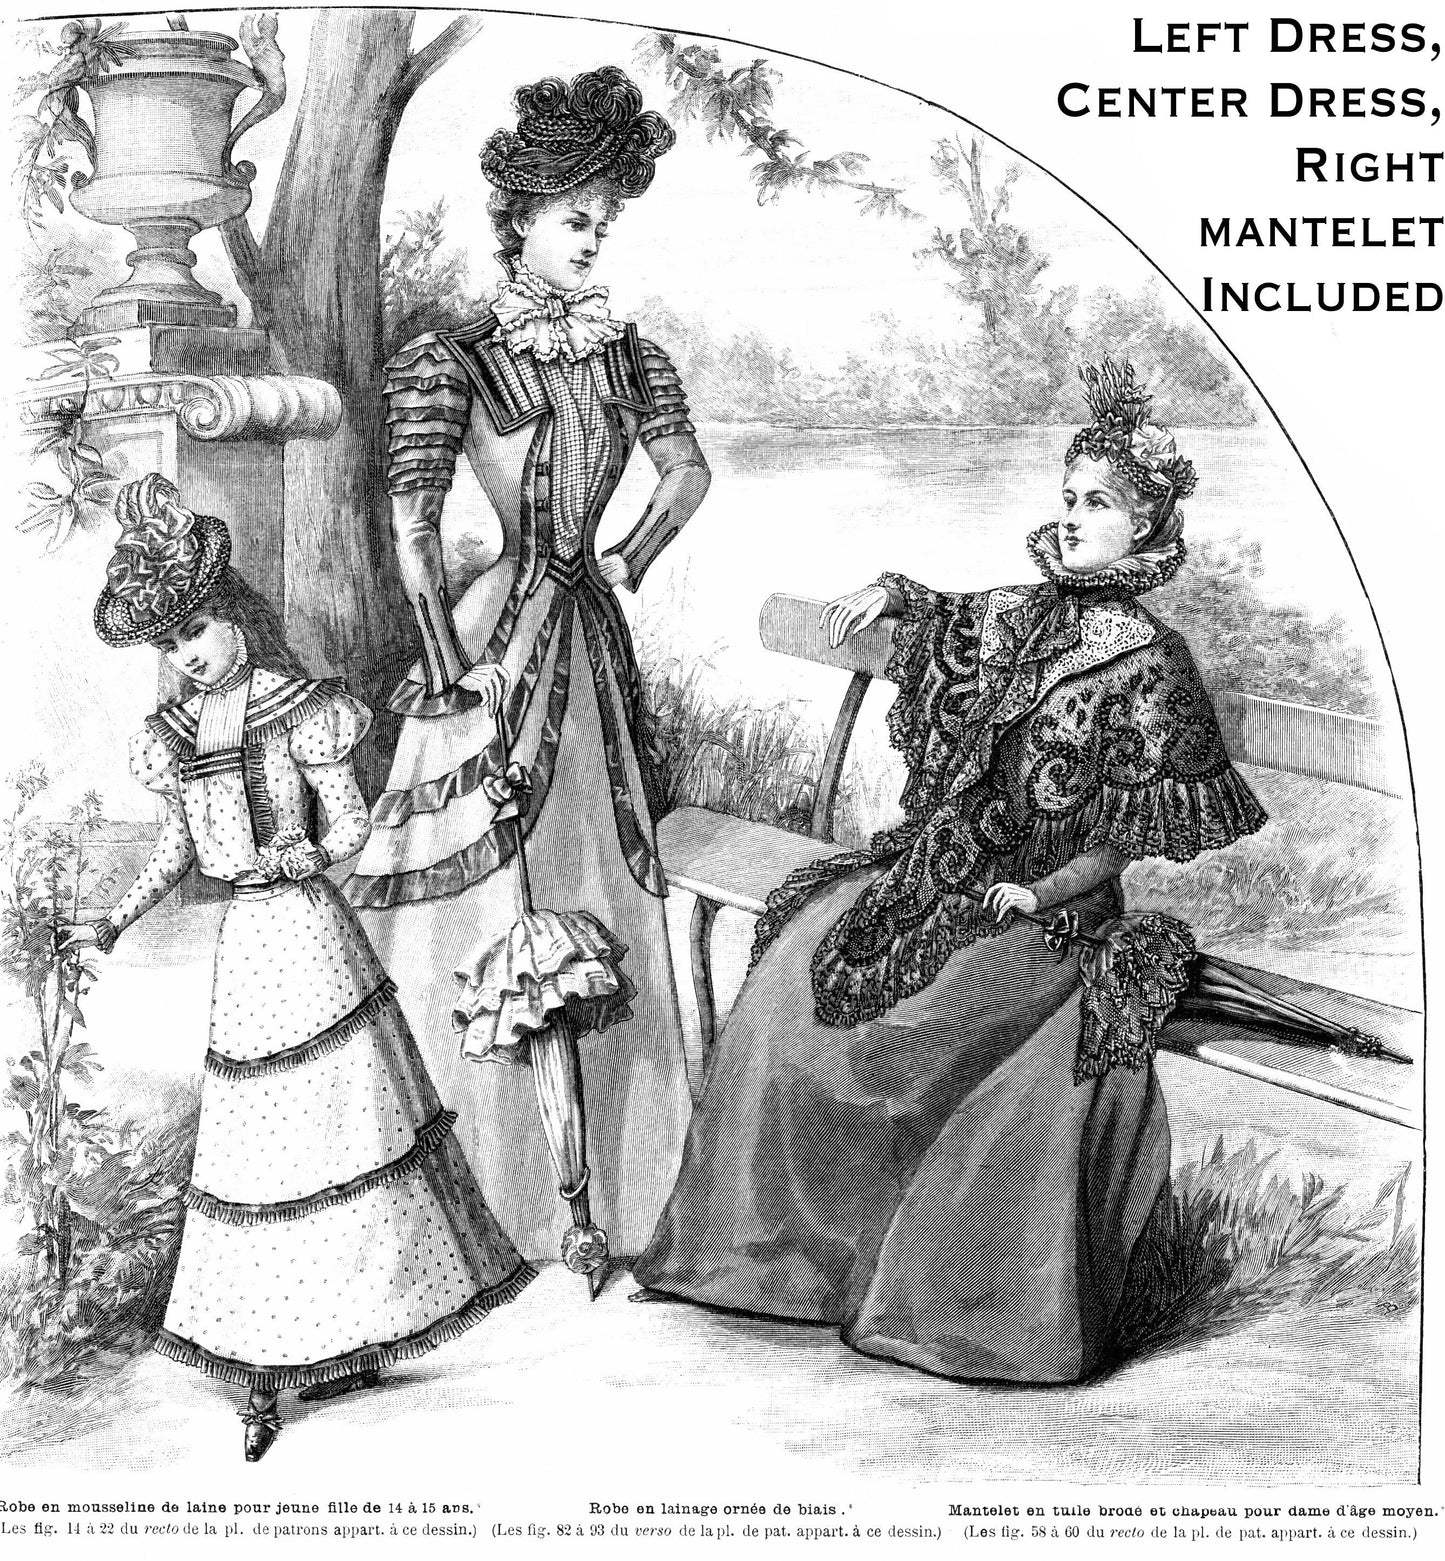 E-Pattern & E-Book- 1898 May 1st No 18 Issue of La Mode Illustree- INCLUDES PATTERNS- Victorian Fashion Sewing Magazine